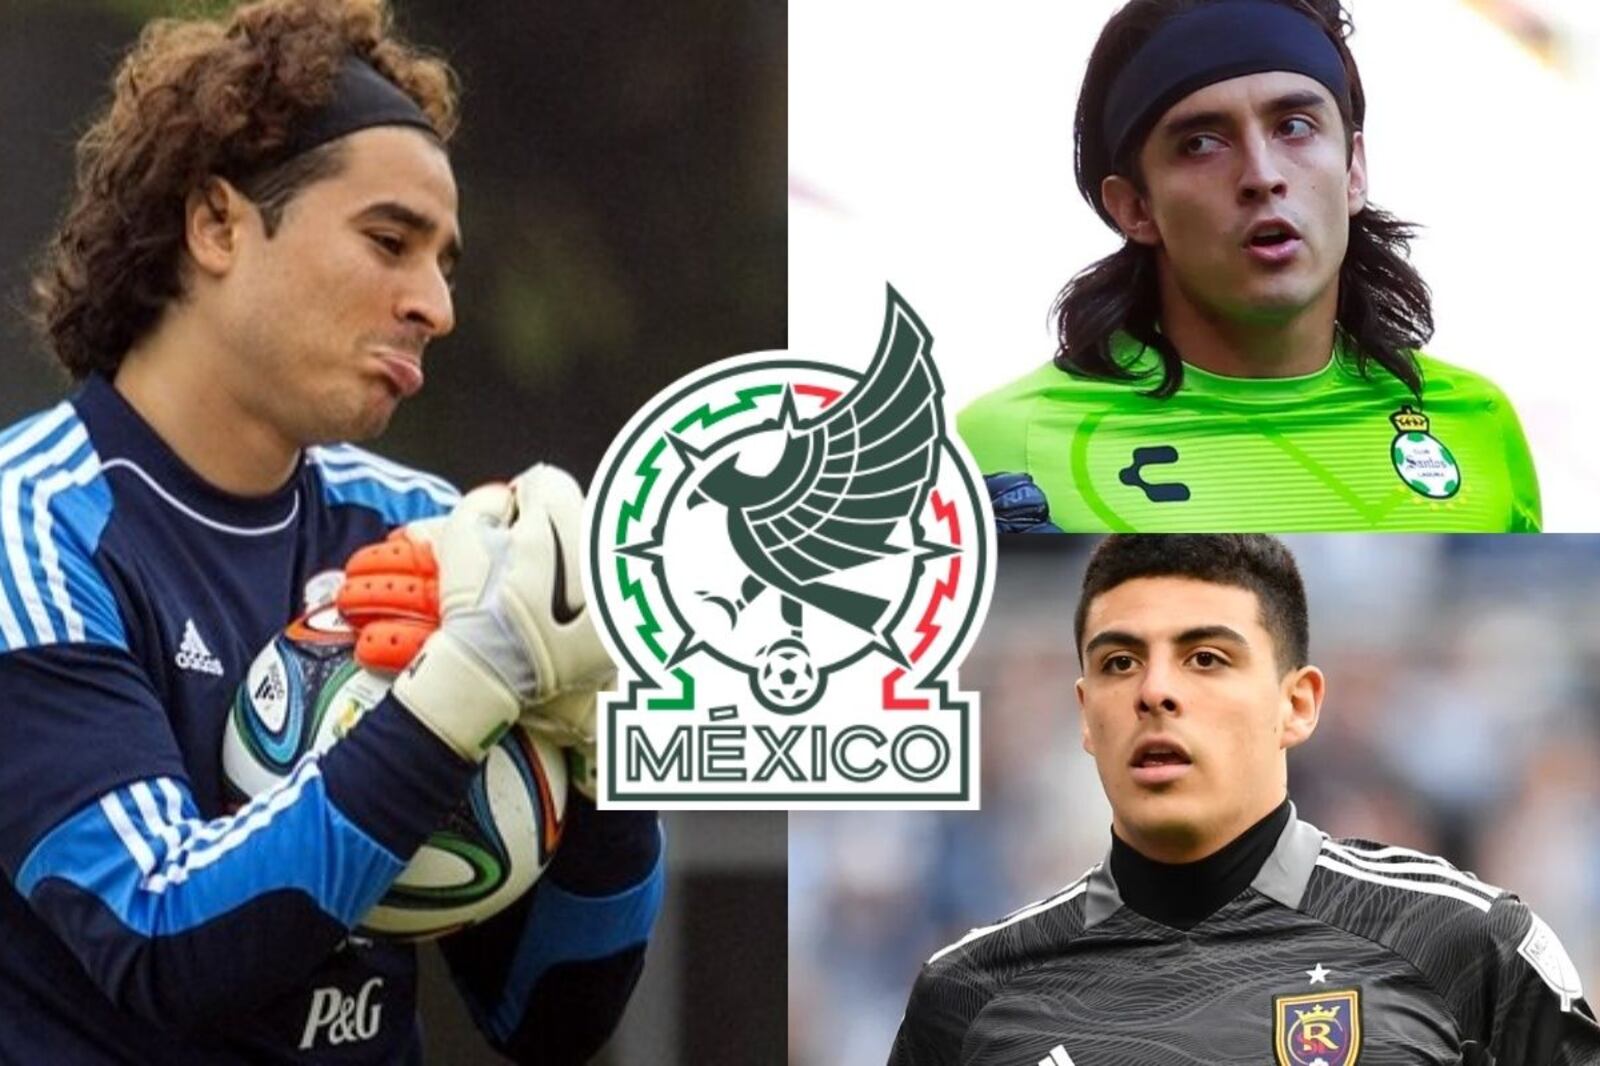 He found out that Ochoa is going to the World Cup, resigns from El Tri and says yes to Spain